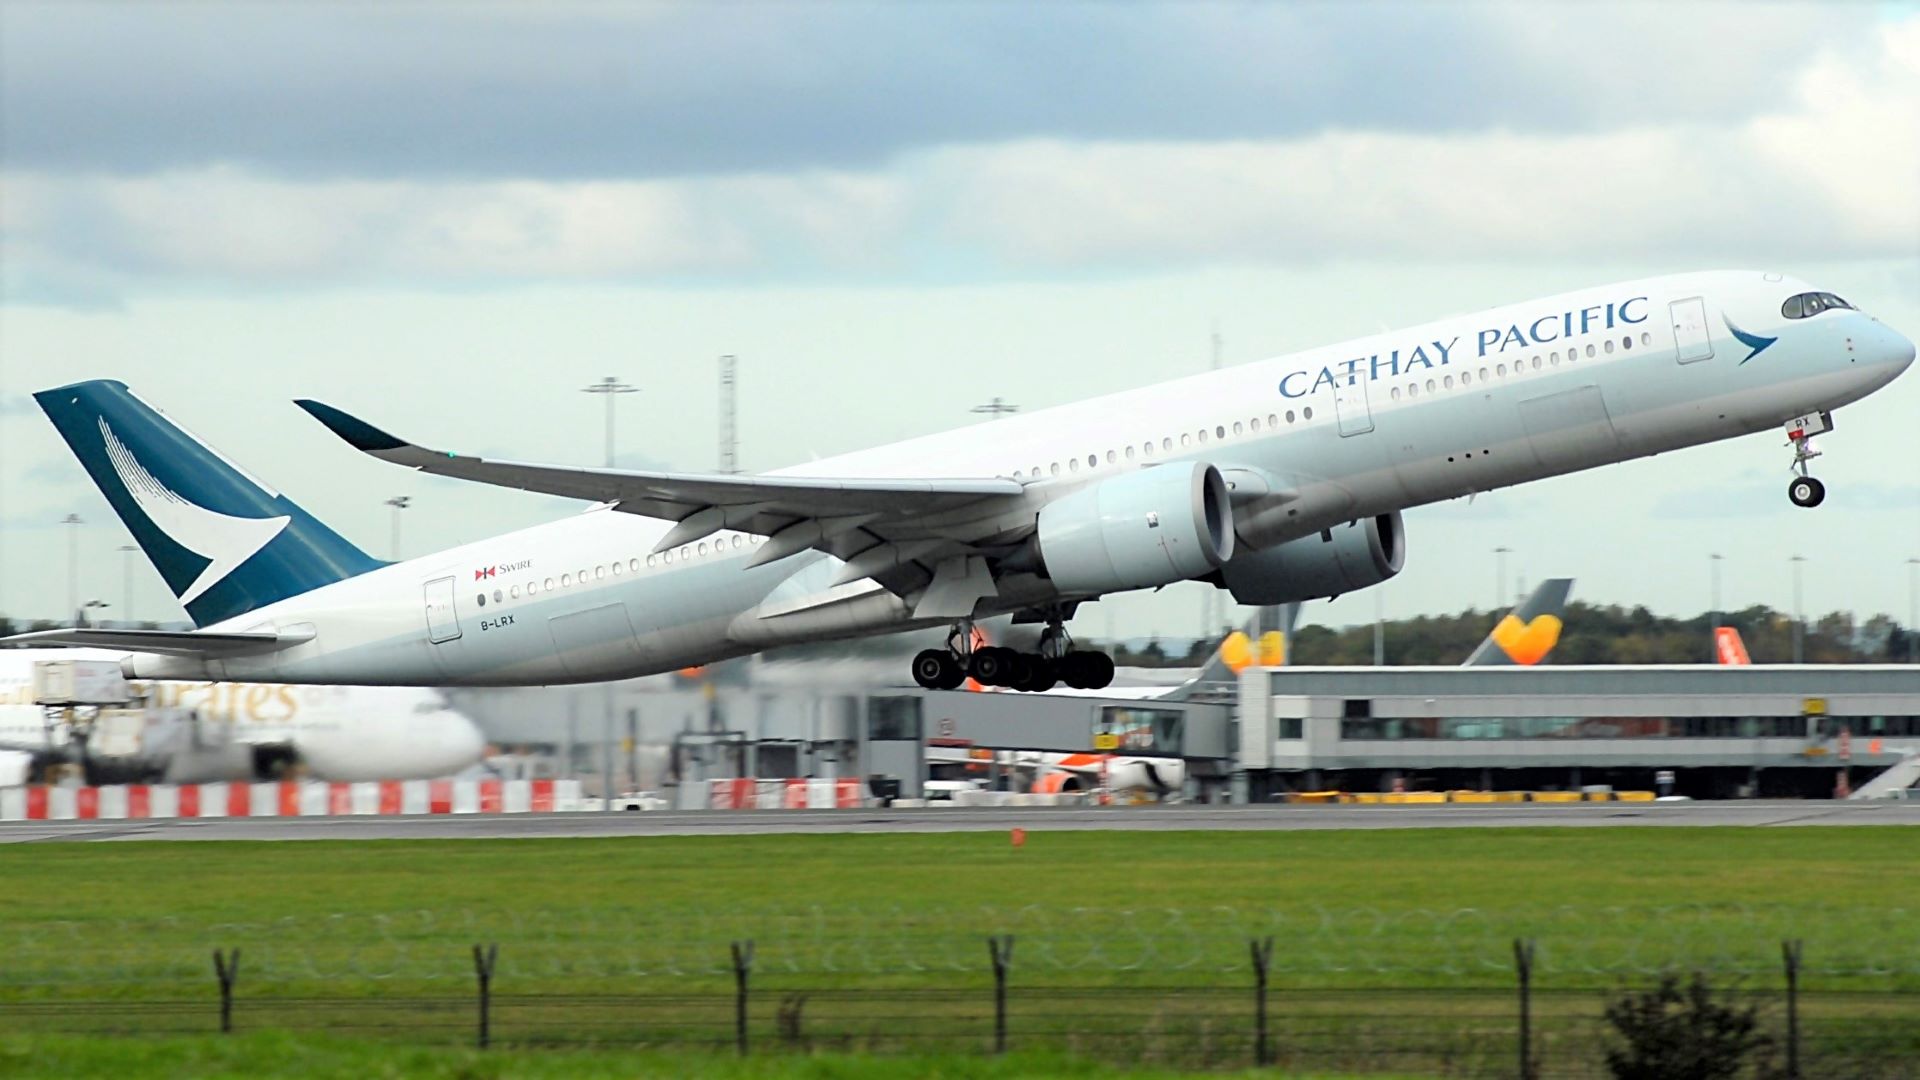 A Cathay Pacific A350 passenger jet takes off.